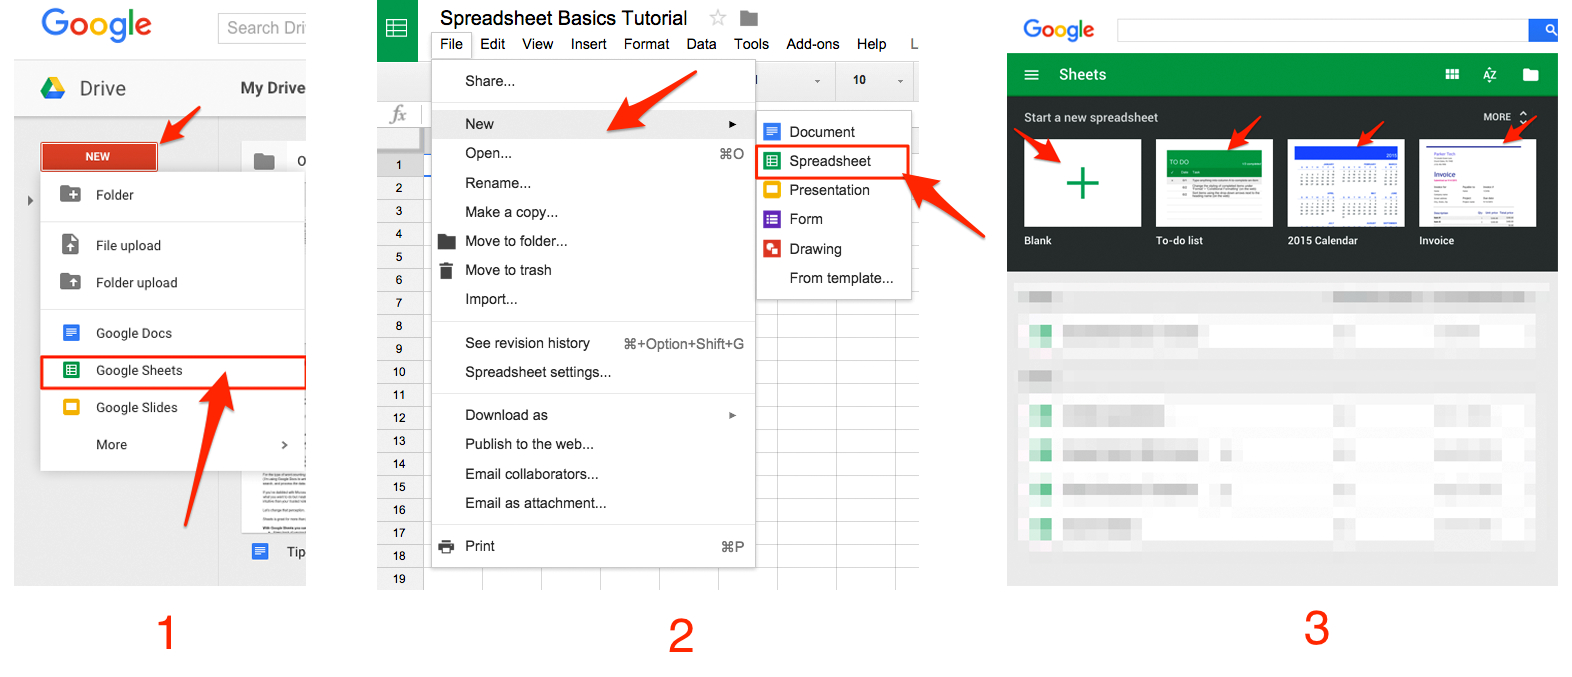 Help In Excel Spreadsheet For Google Sheets 101: The Beginner's Guide To Online Spreadsheets  The